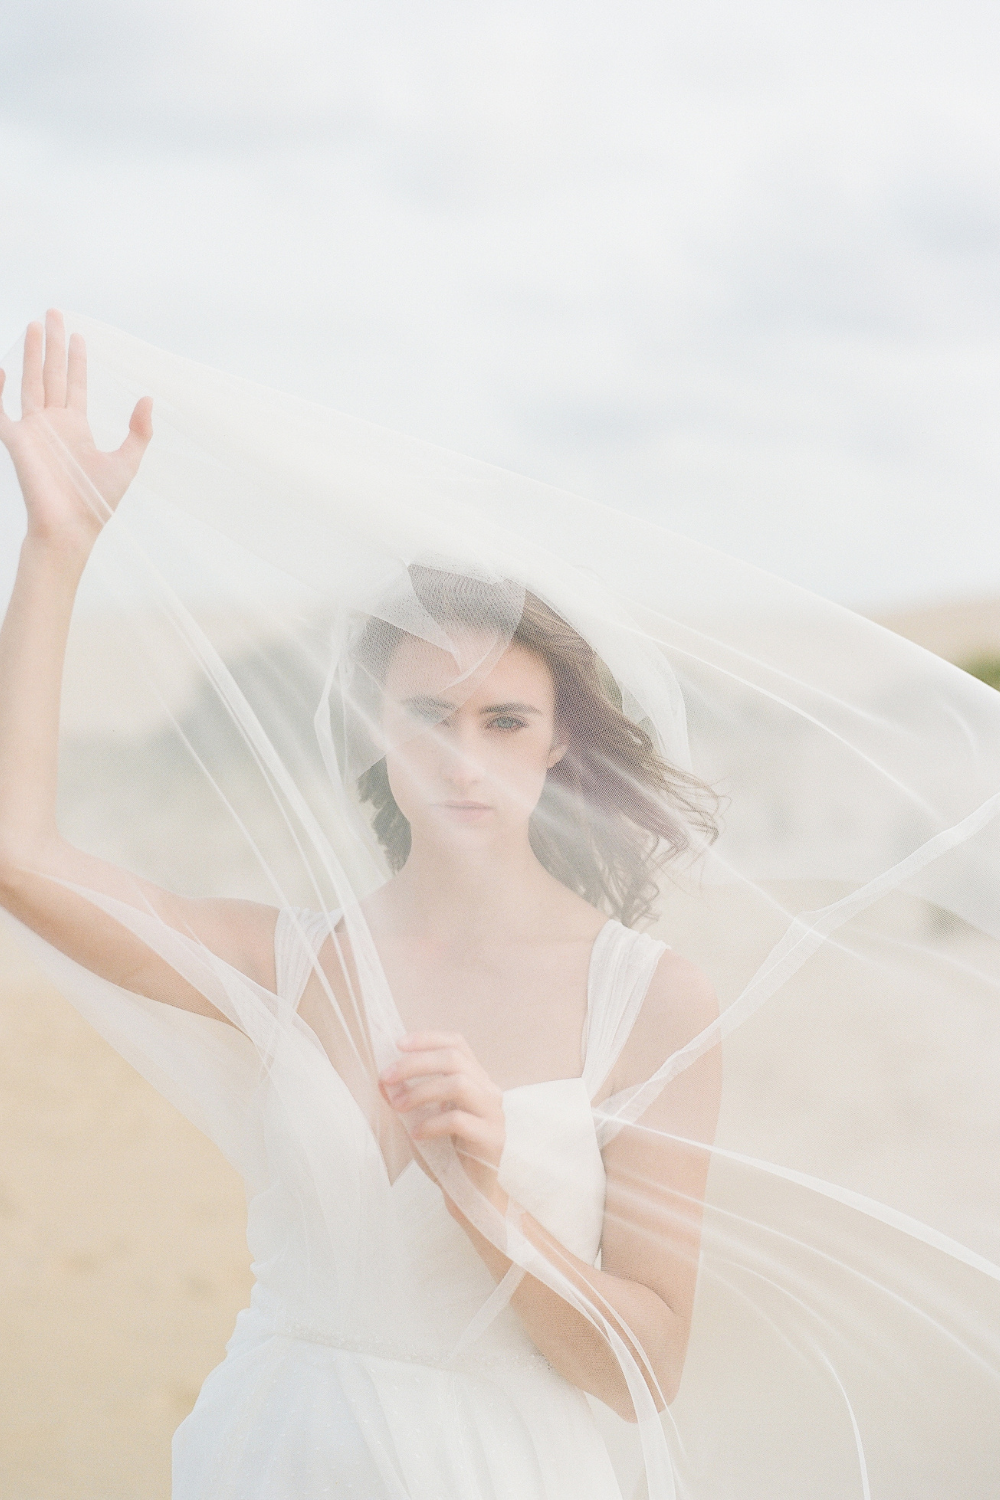 Bride at beach wedding with veil in front of face